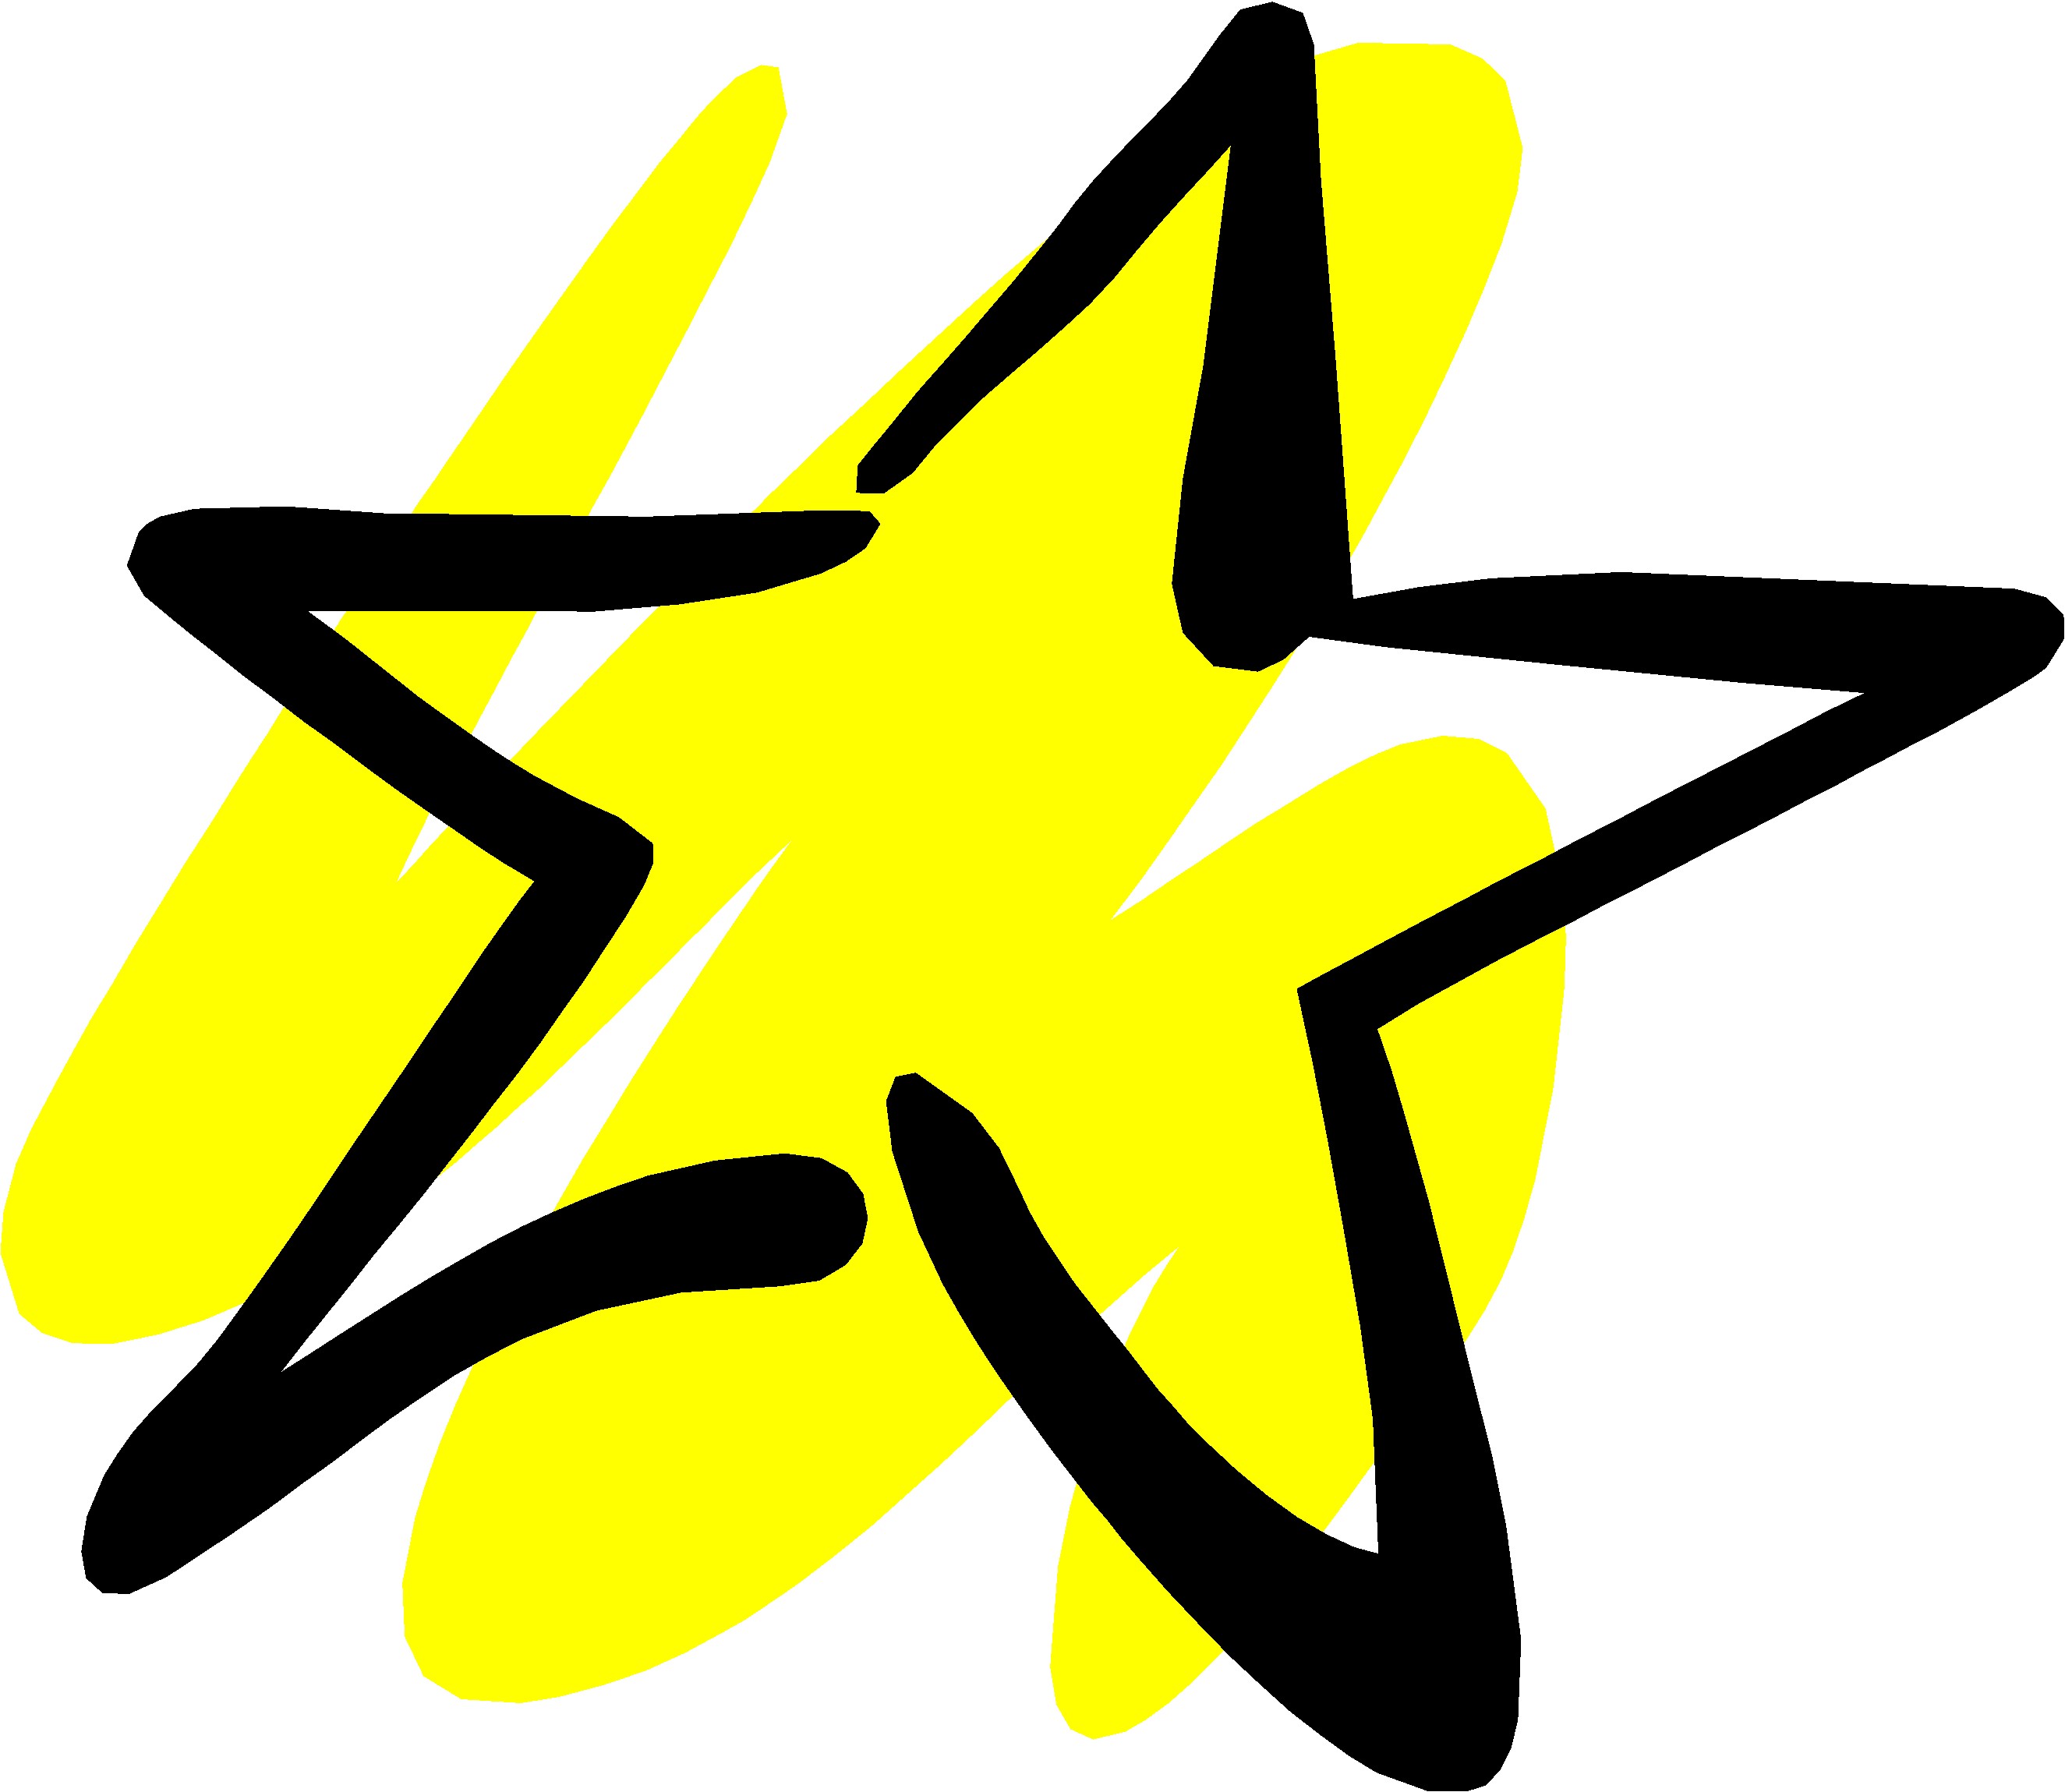 Free Yellow Star Image, Download Free Clip Art, Free Clip.